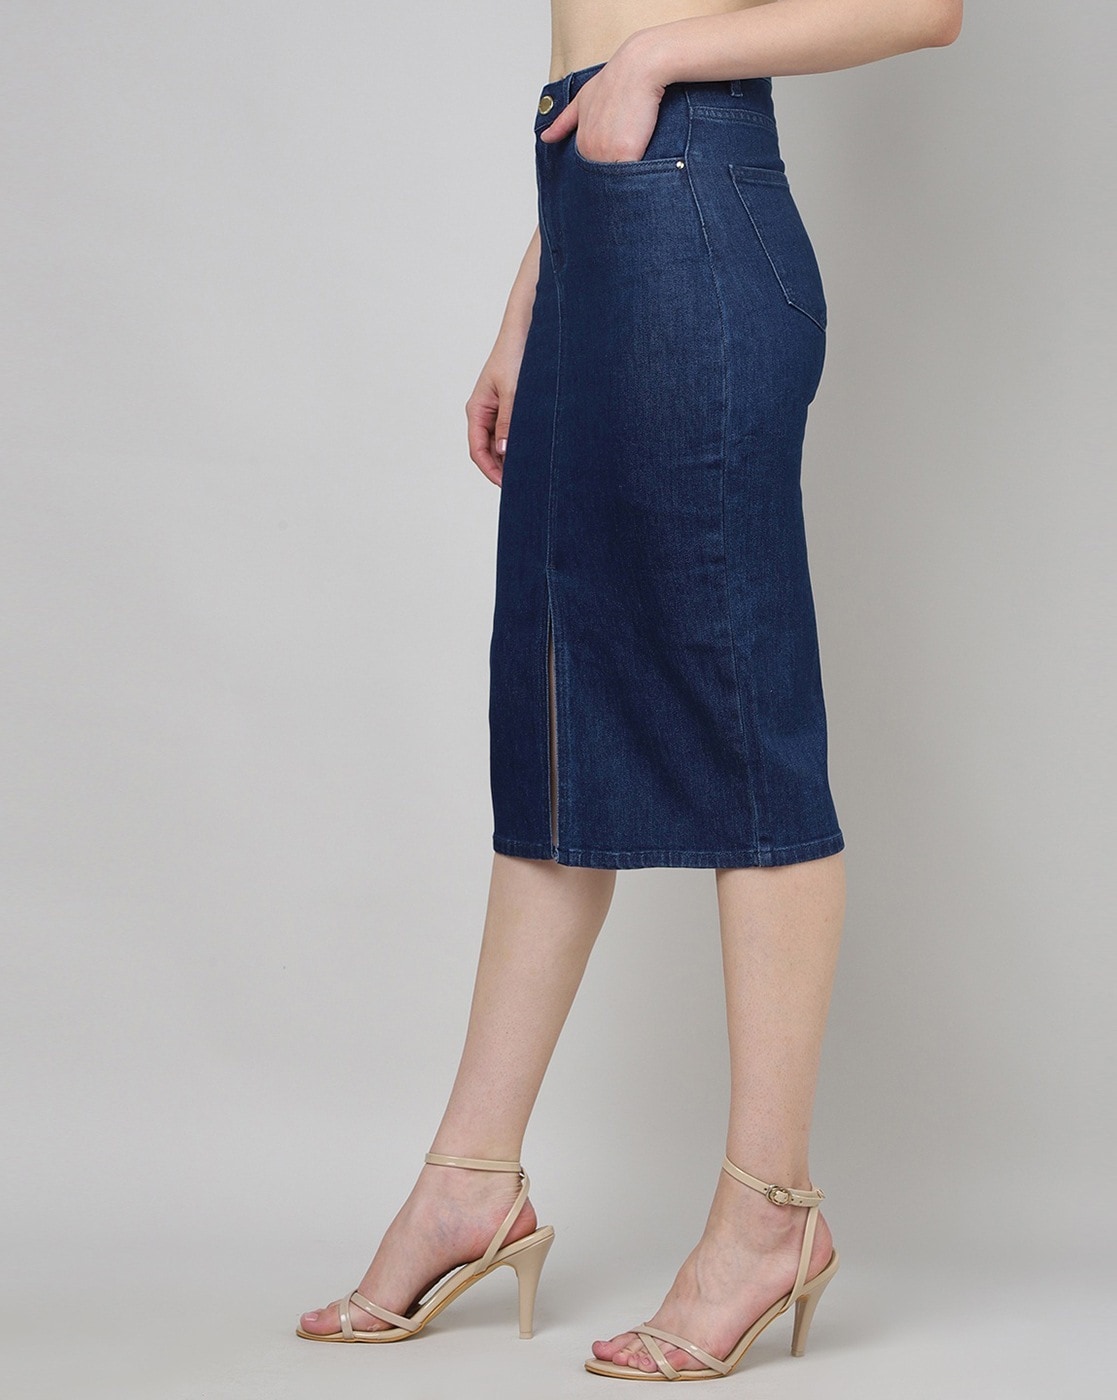 Stay Cool and Stylish this Summer with a Denim Skirt